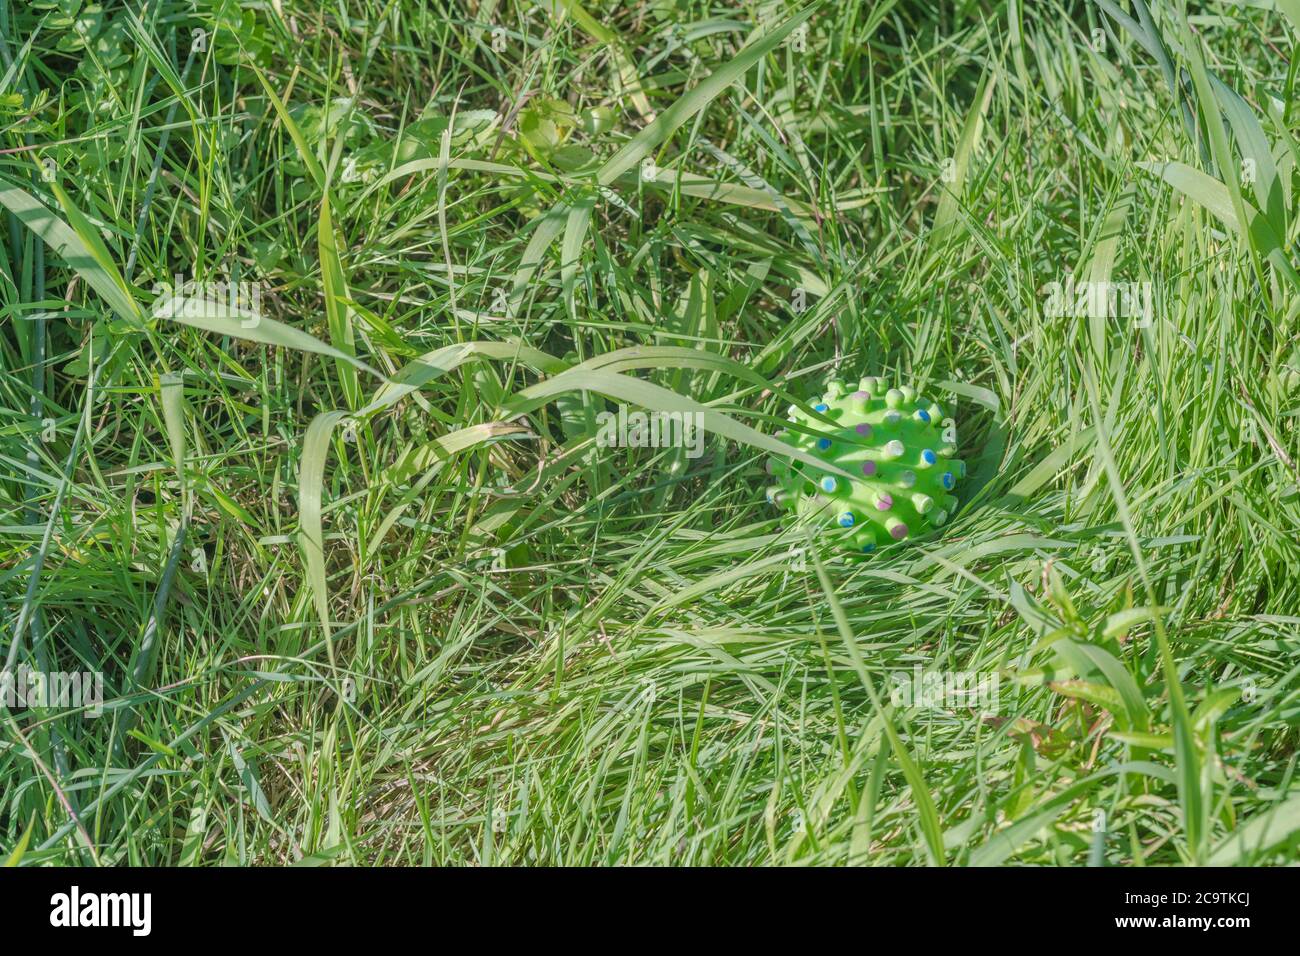 Lost spiky green dog's play ball in long grass. Metaphor dog ownership, pet owners, animal toys. Stock Photo